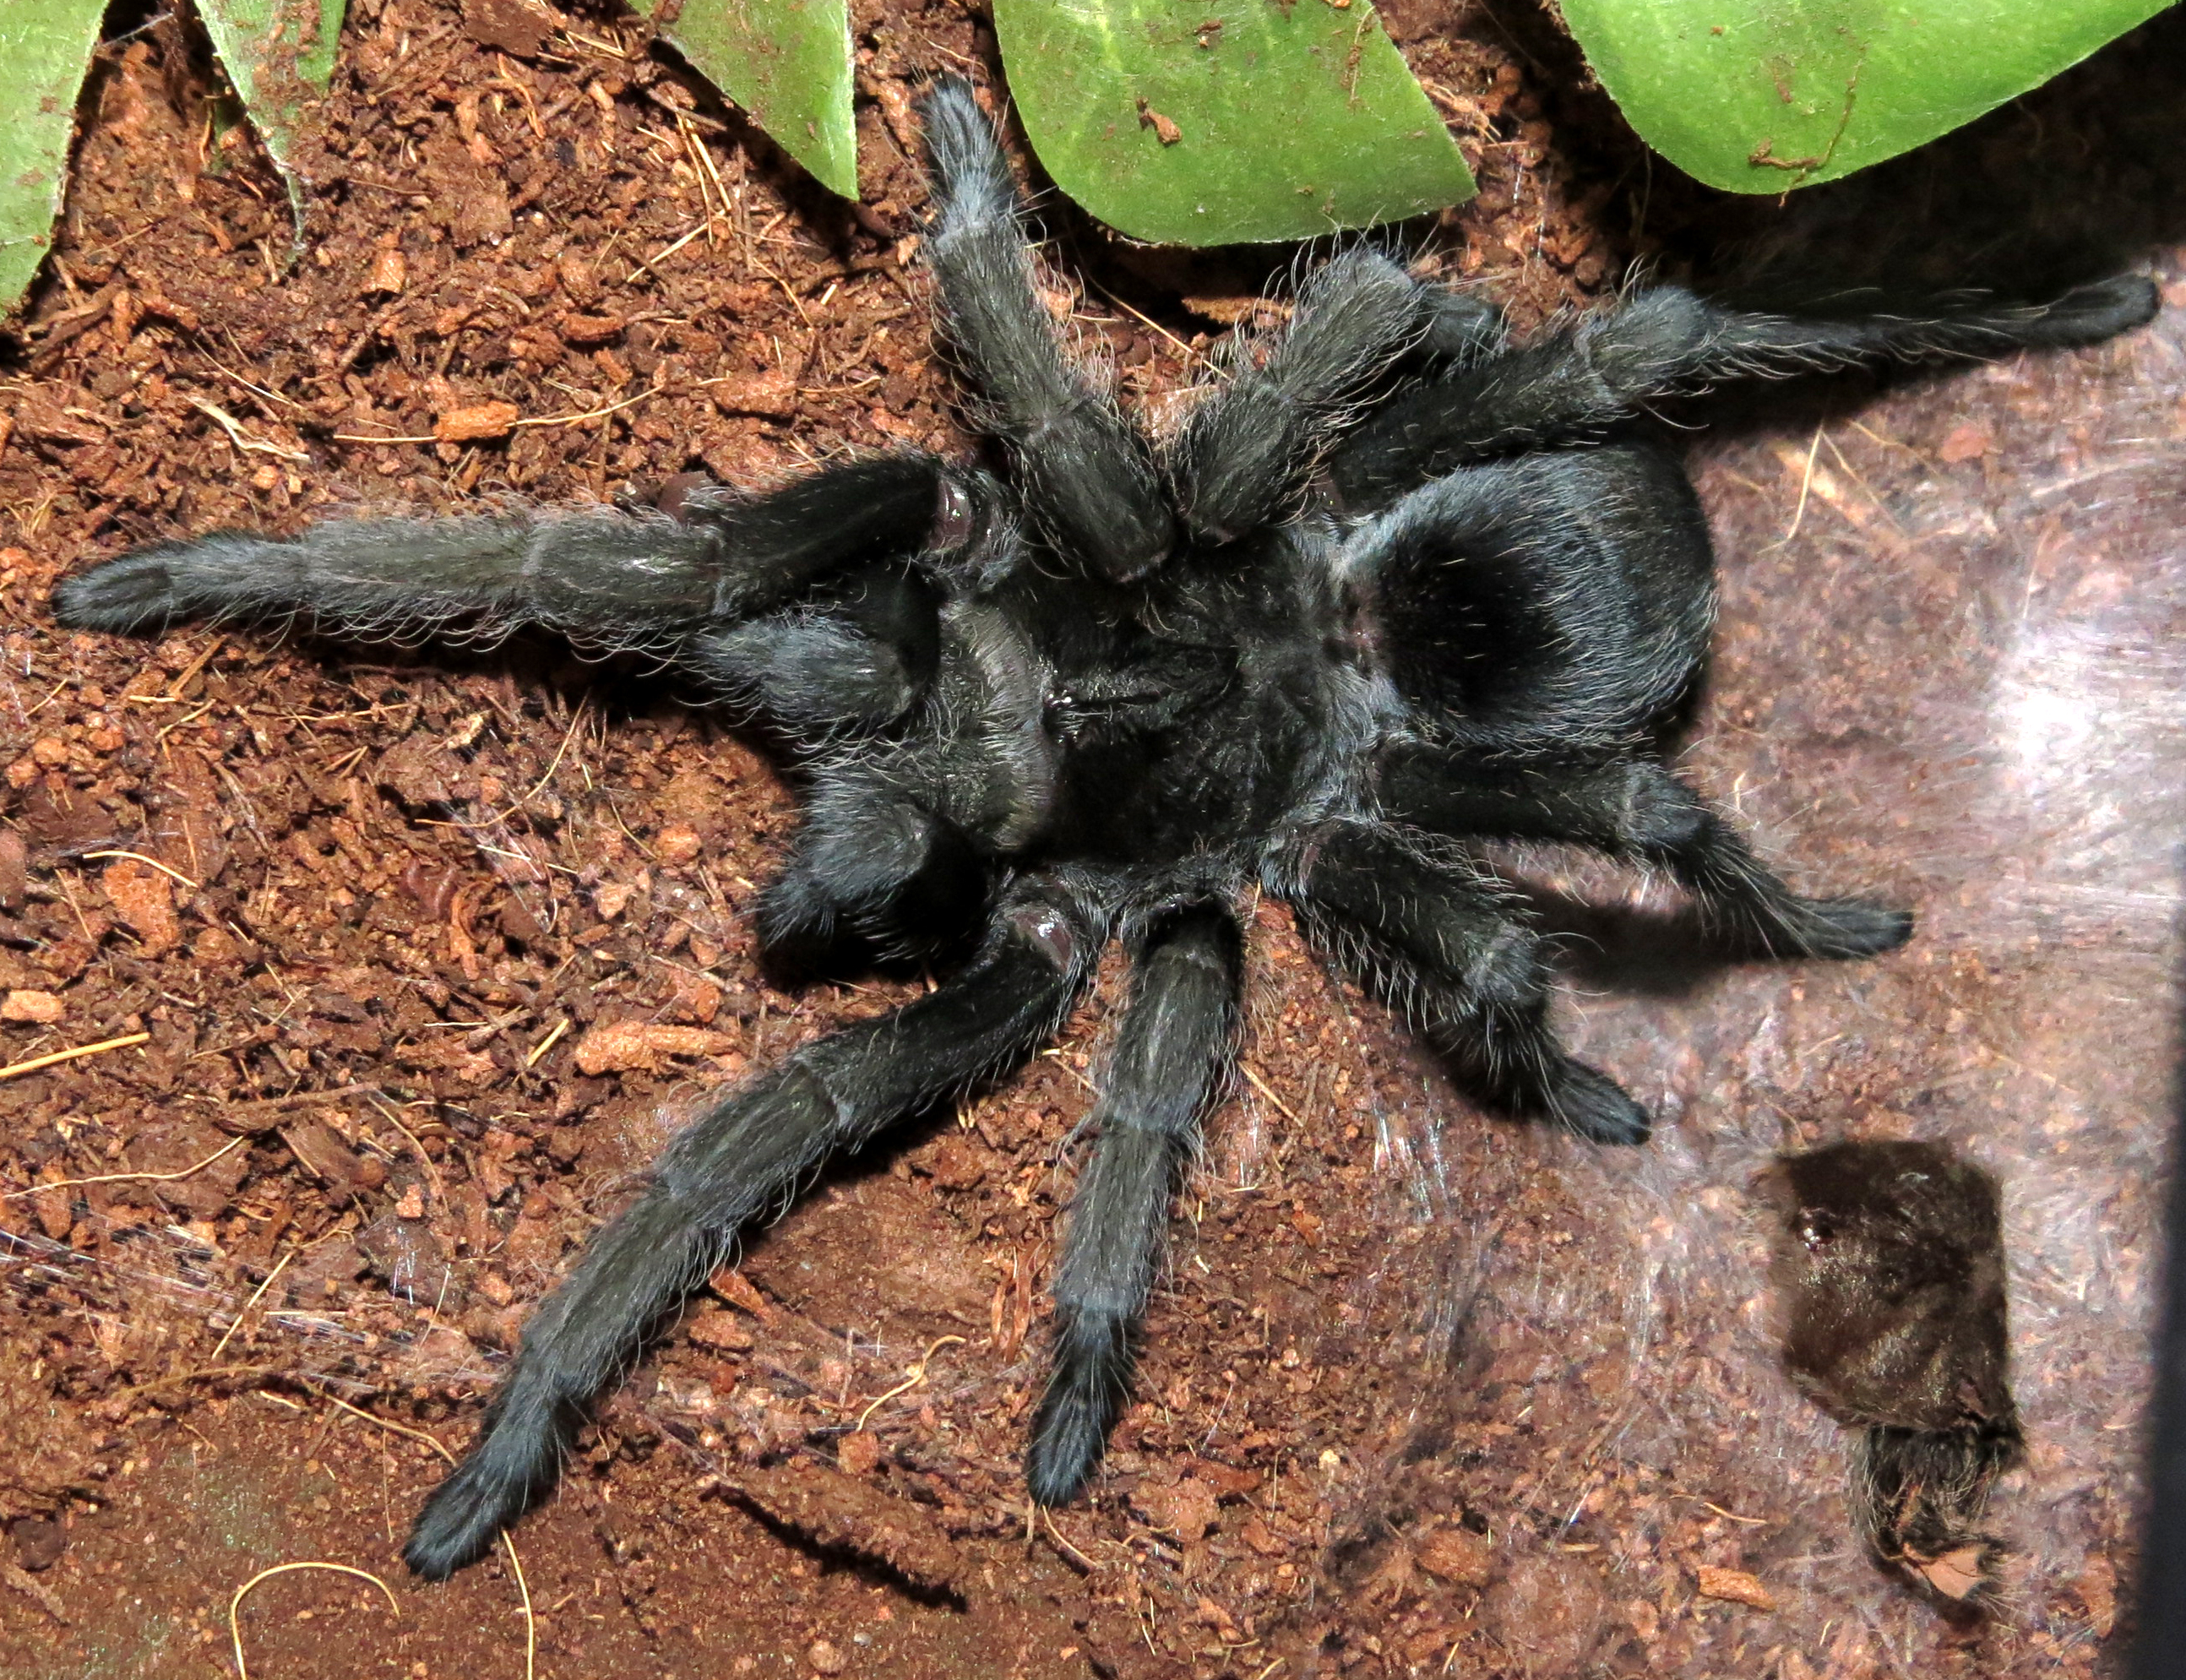 Flash and the Mask (♀ Grammostola pulchra 3.5")